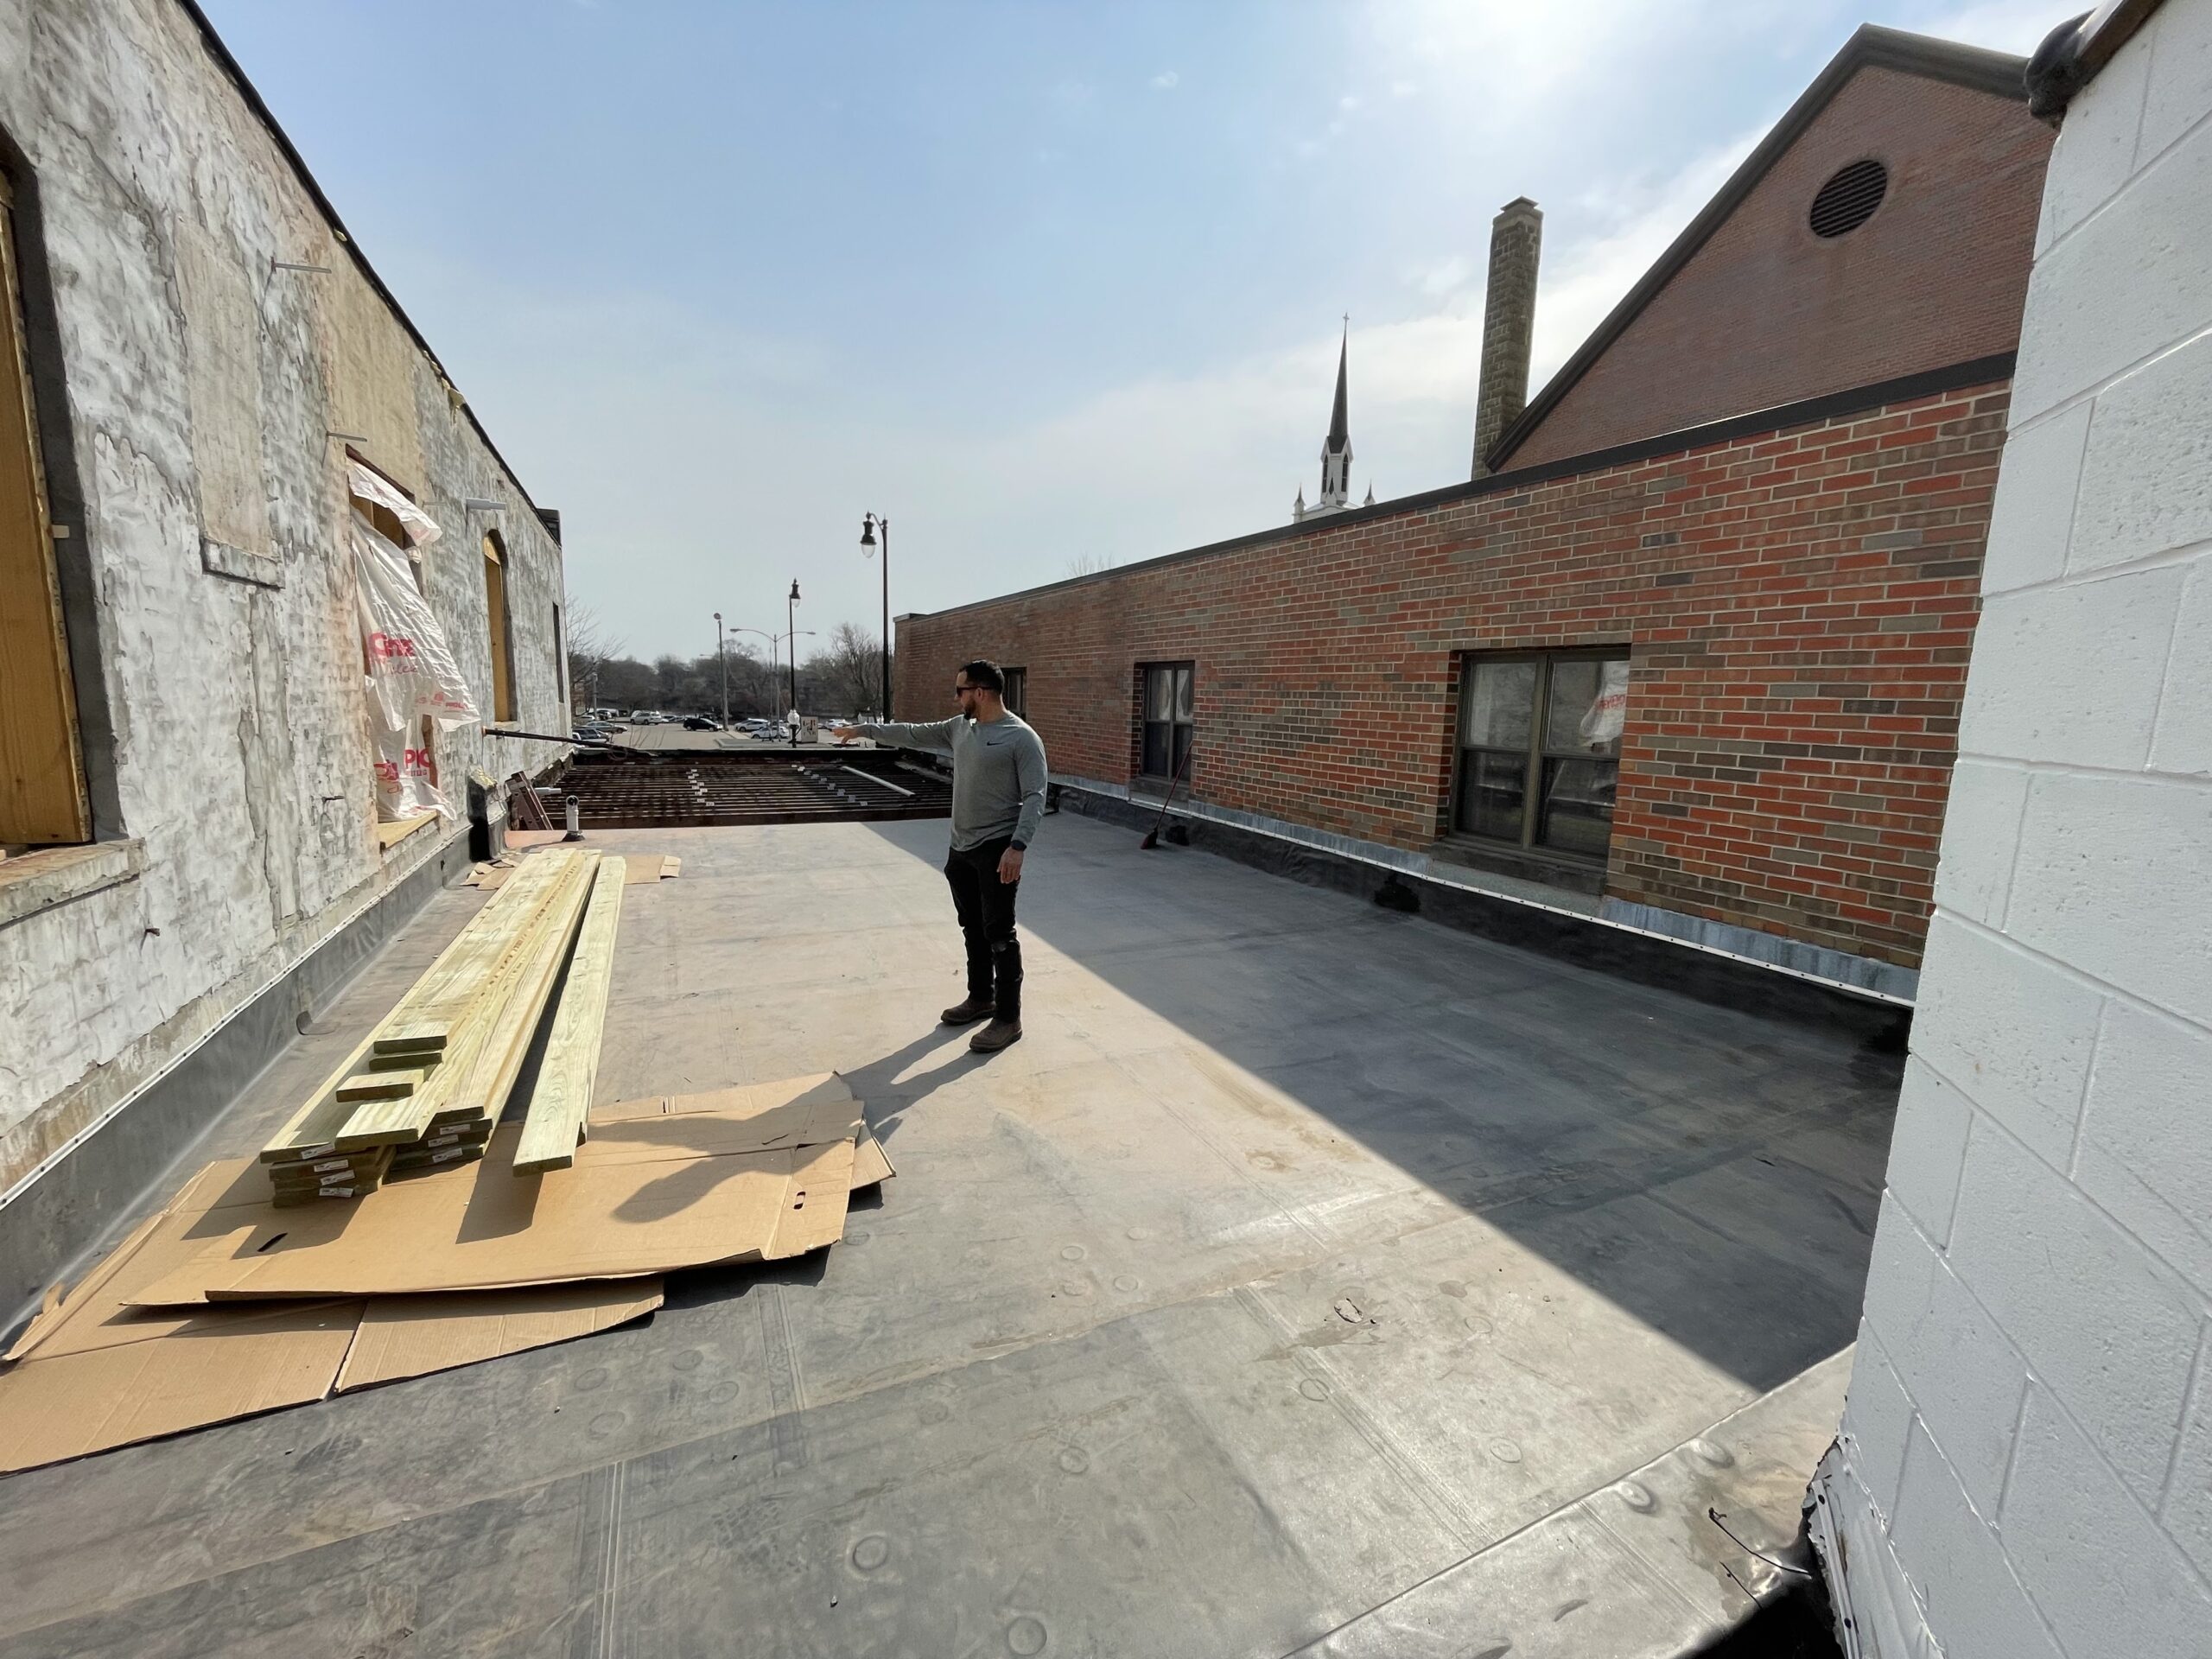 View of roof prior to patio development